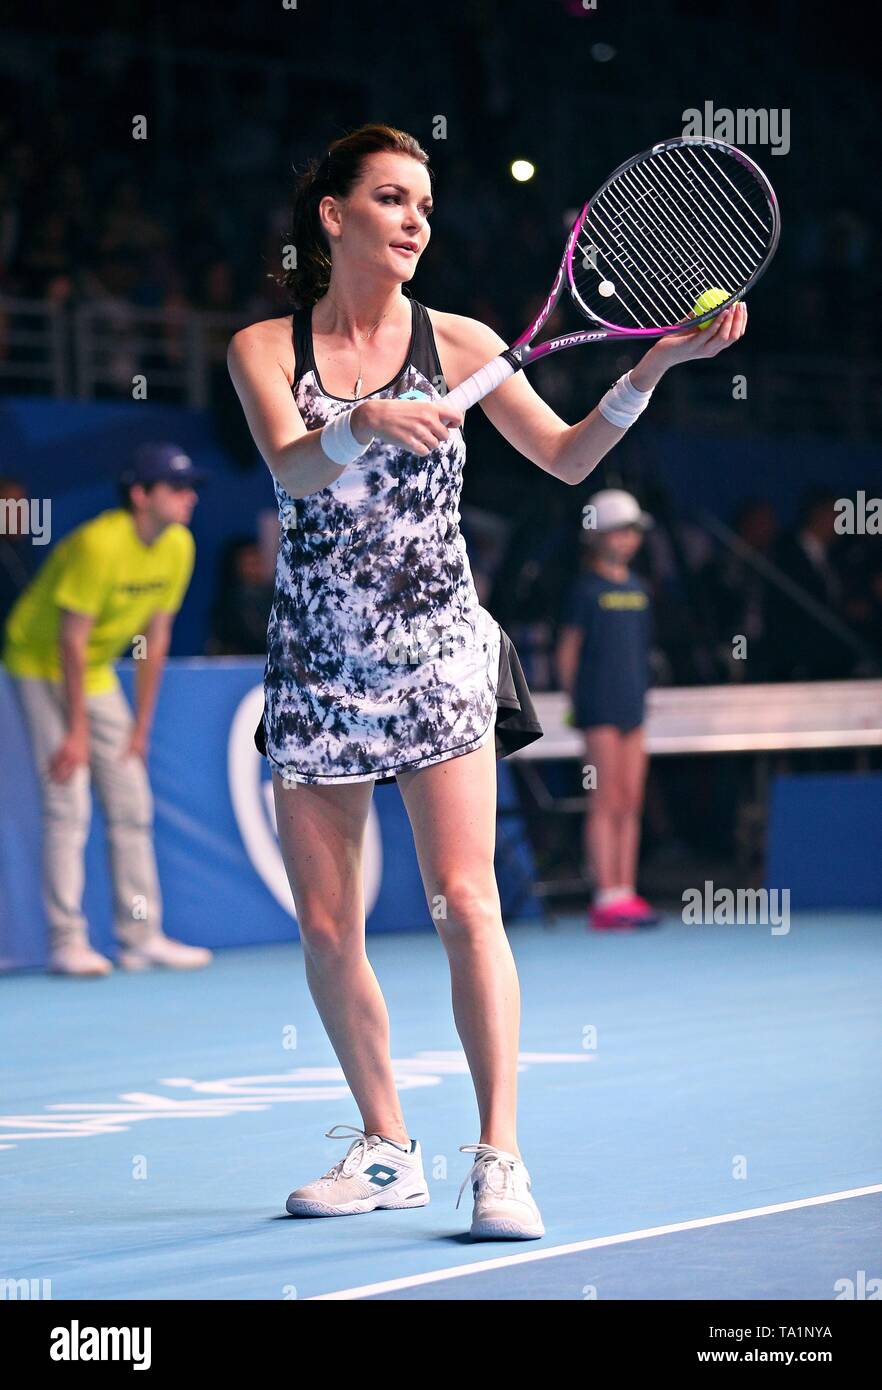 Agnieszka Radwanska seen during a tennis match in honor of her sport  career. An event was held in honor of Polish tennis player Agnieszka  Radwanska, who ended her sports career as she